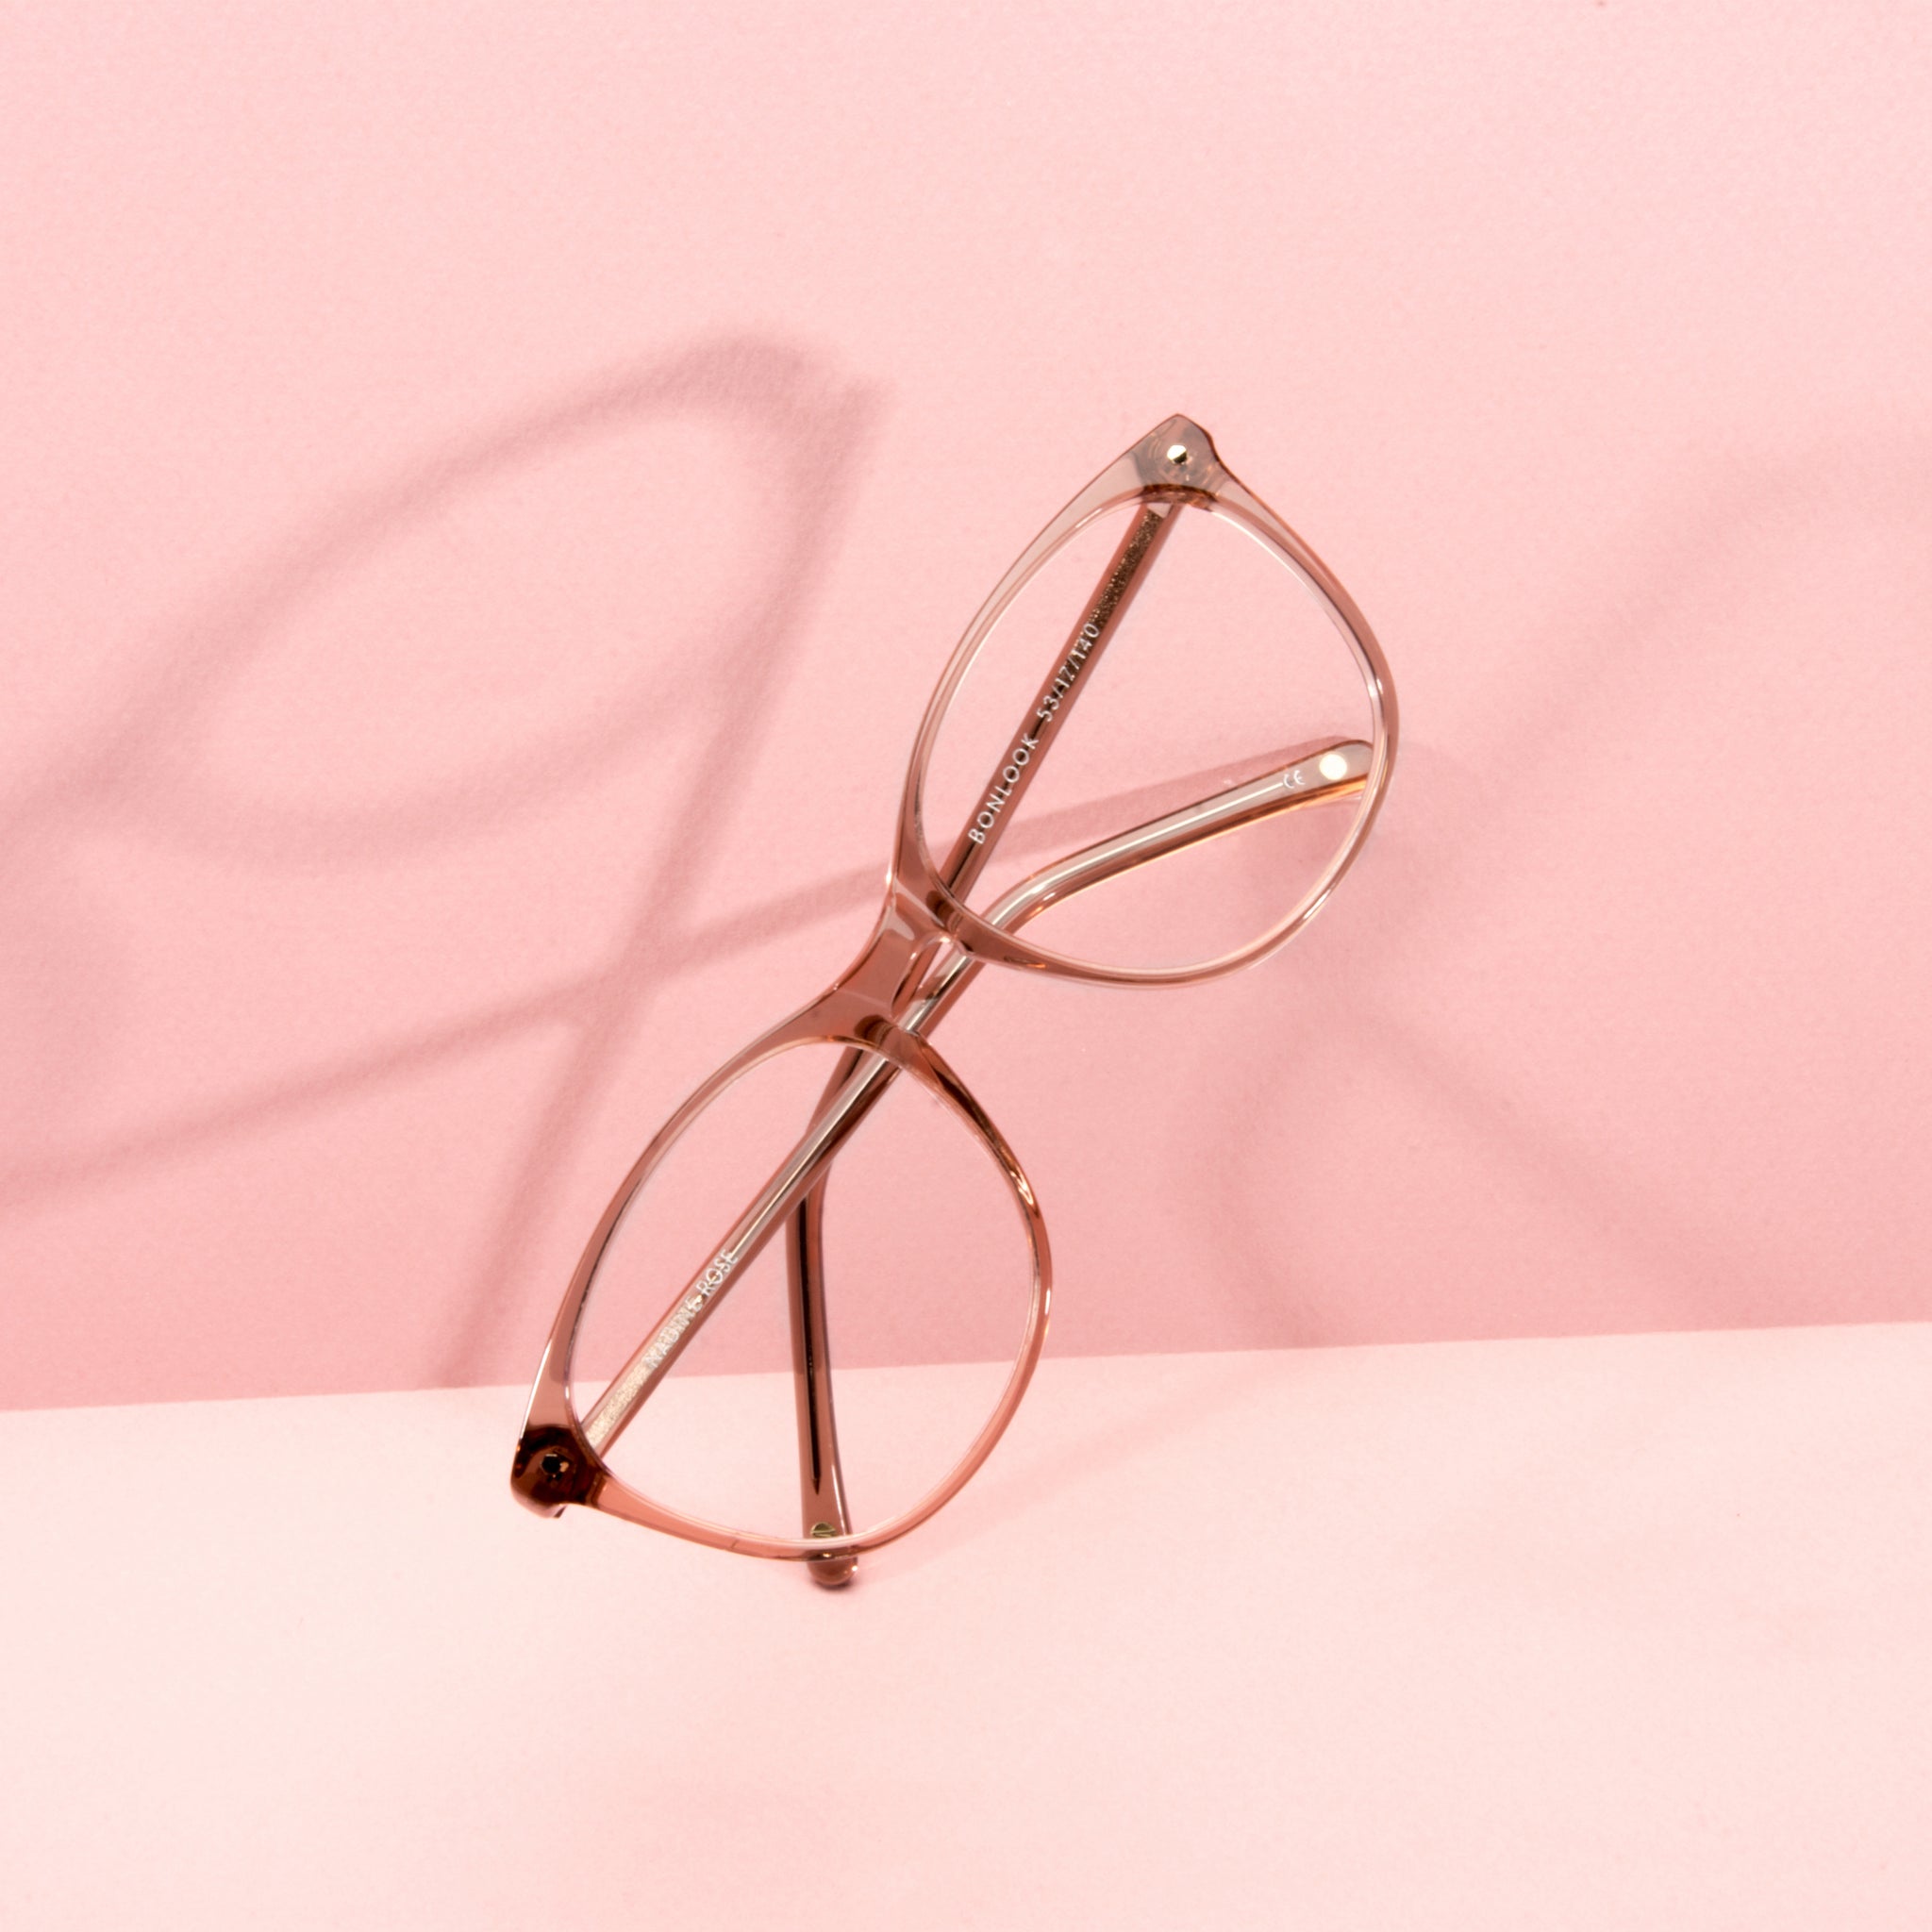 Rose tint your world – frames to wear on Valentine’s Day